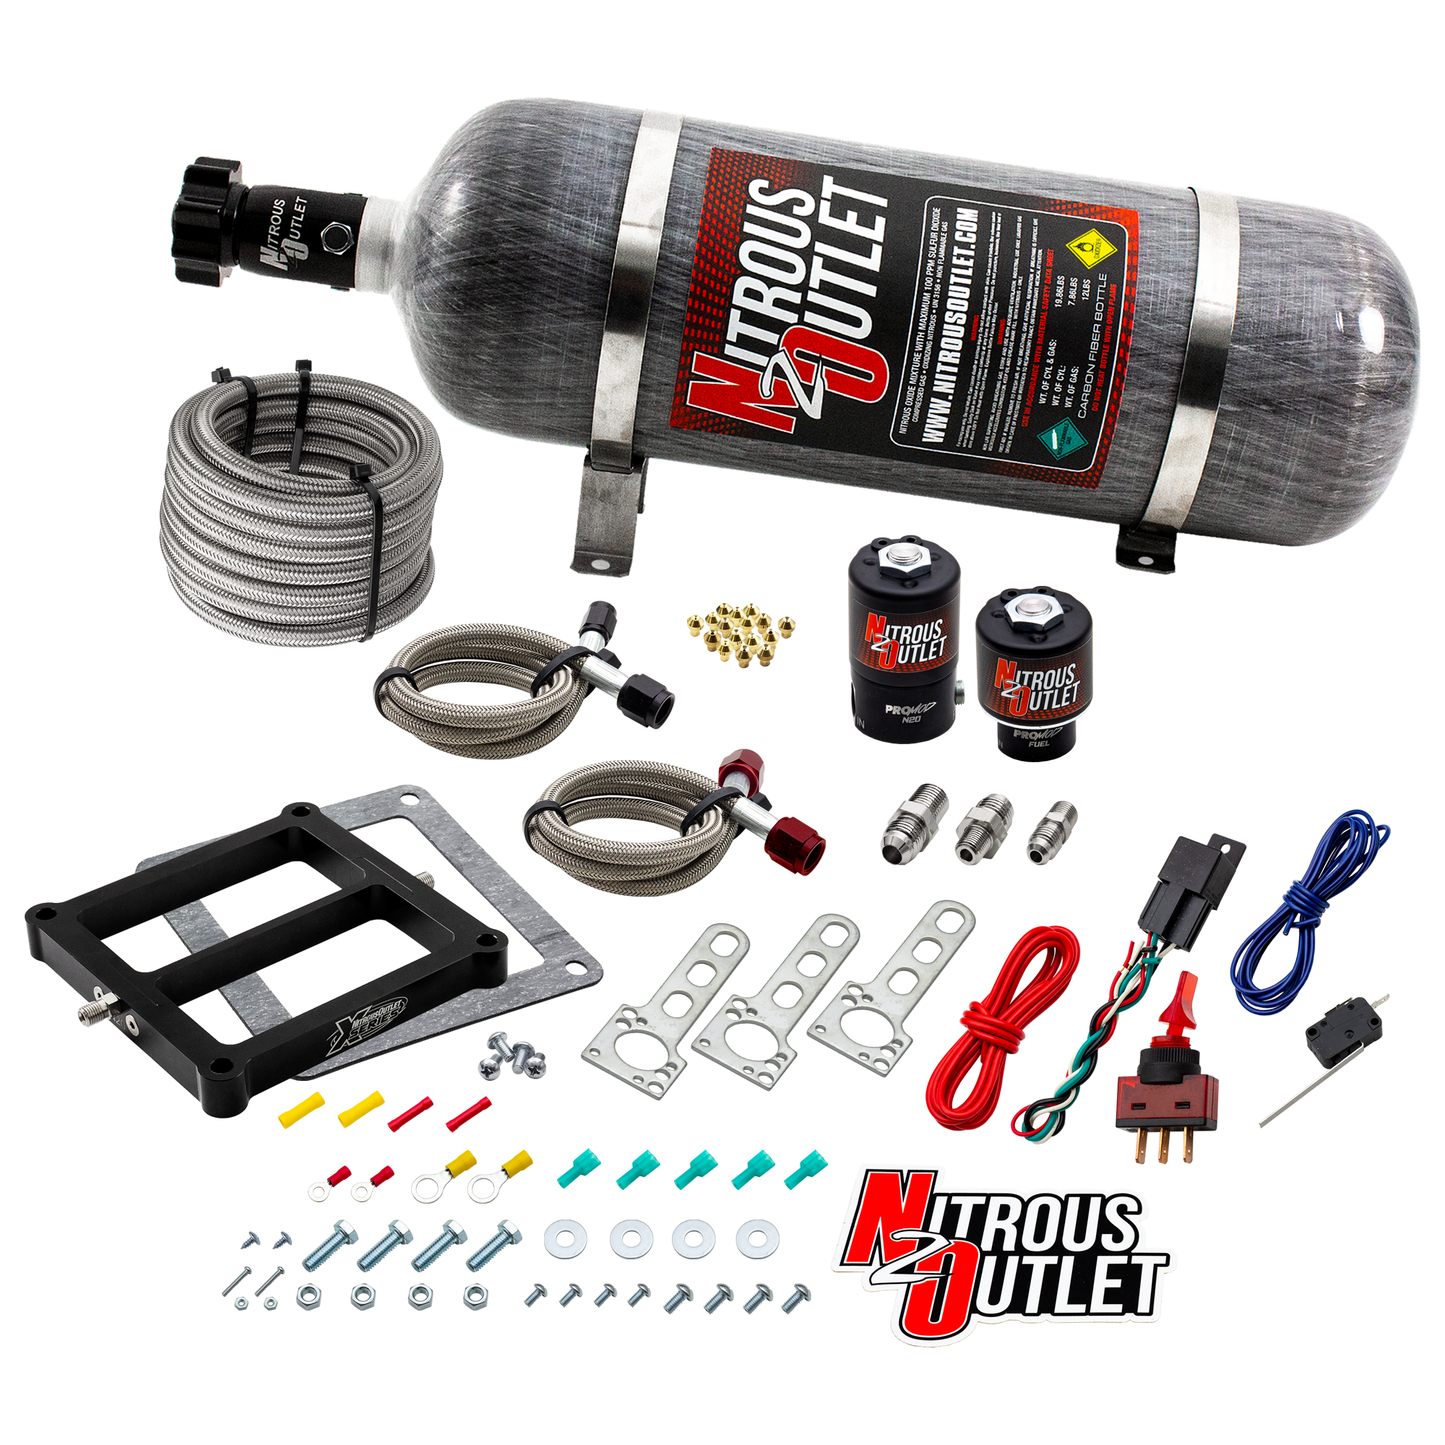 Nitrous Outlet Weekend Warrior Wet 4500 Nitrous Plate System